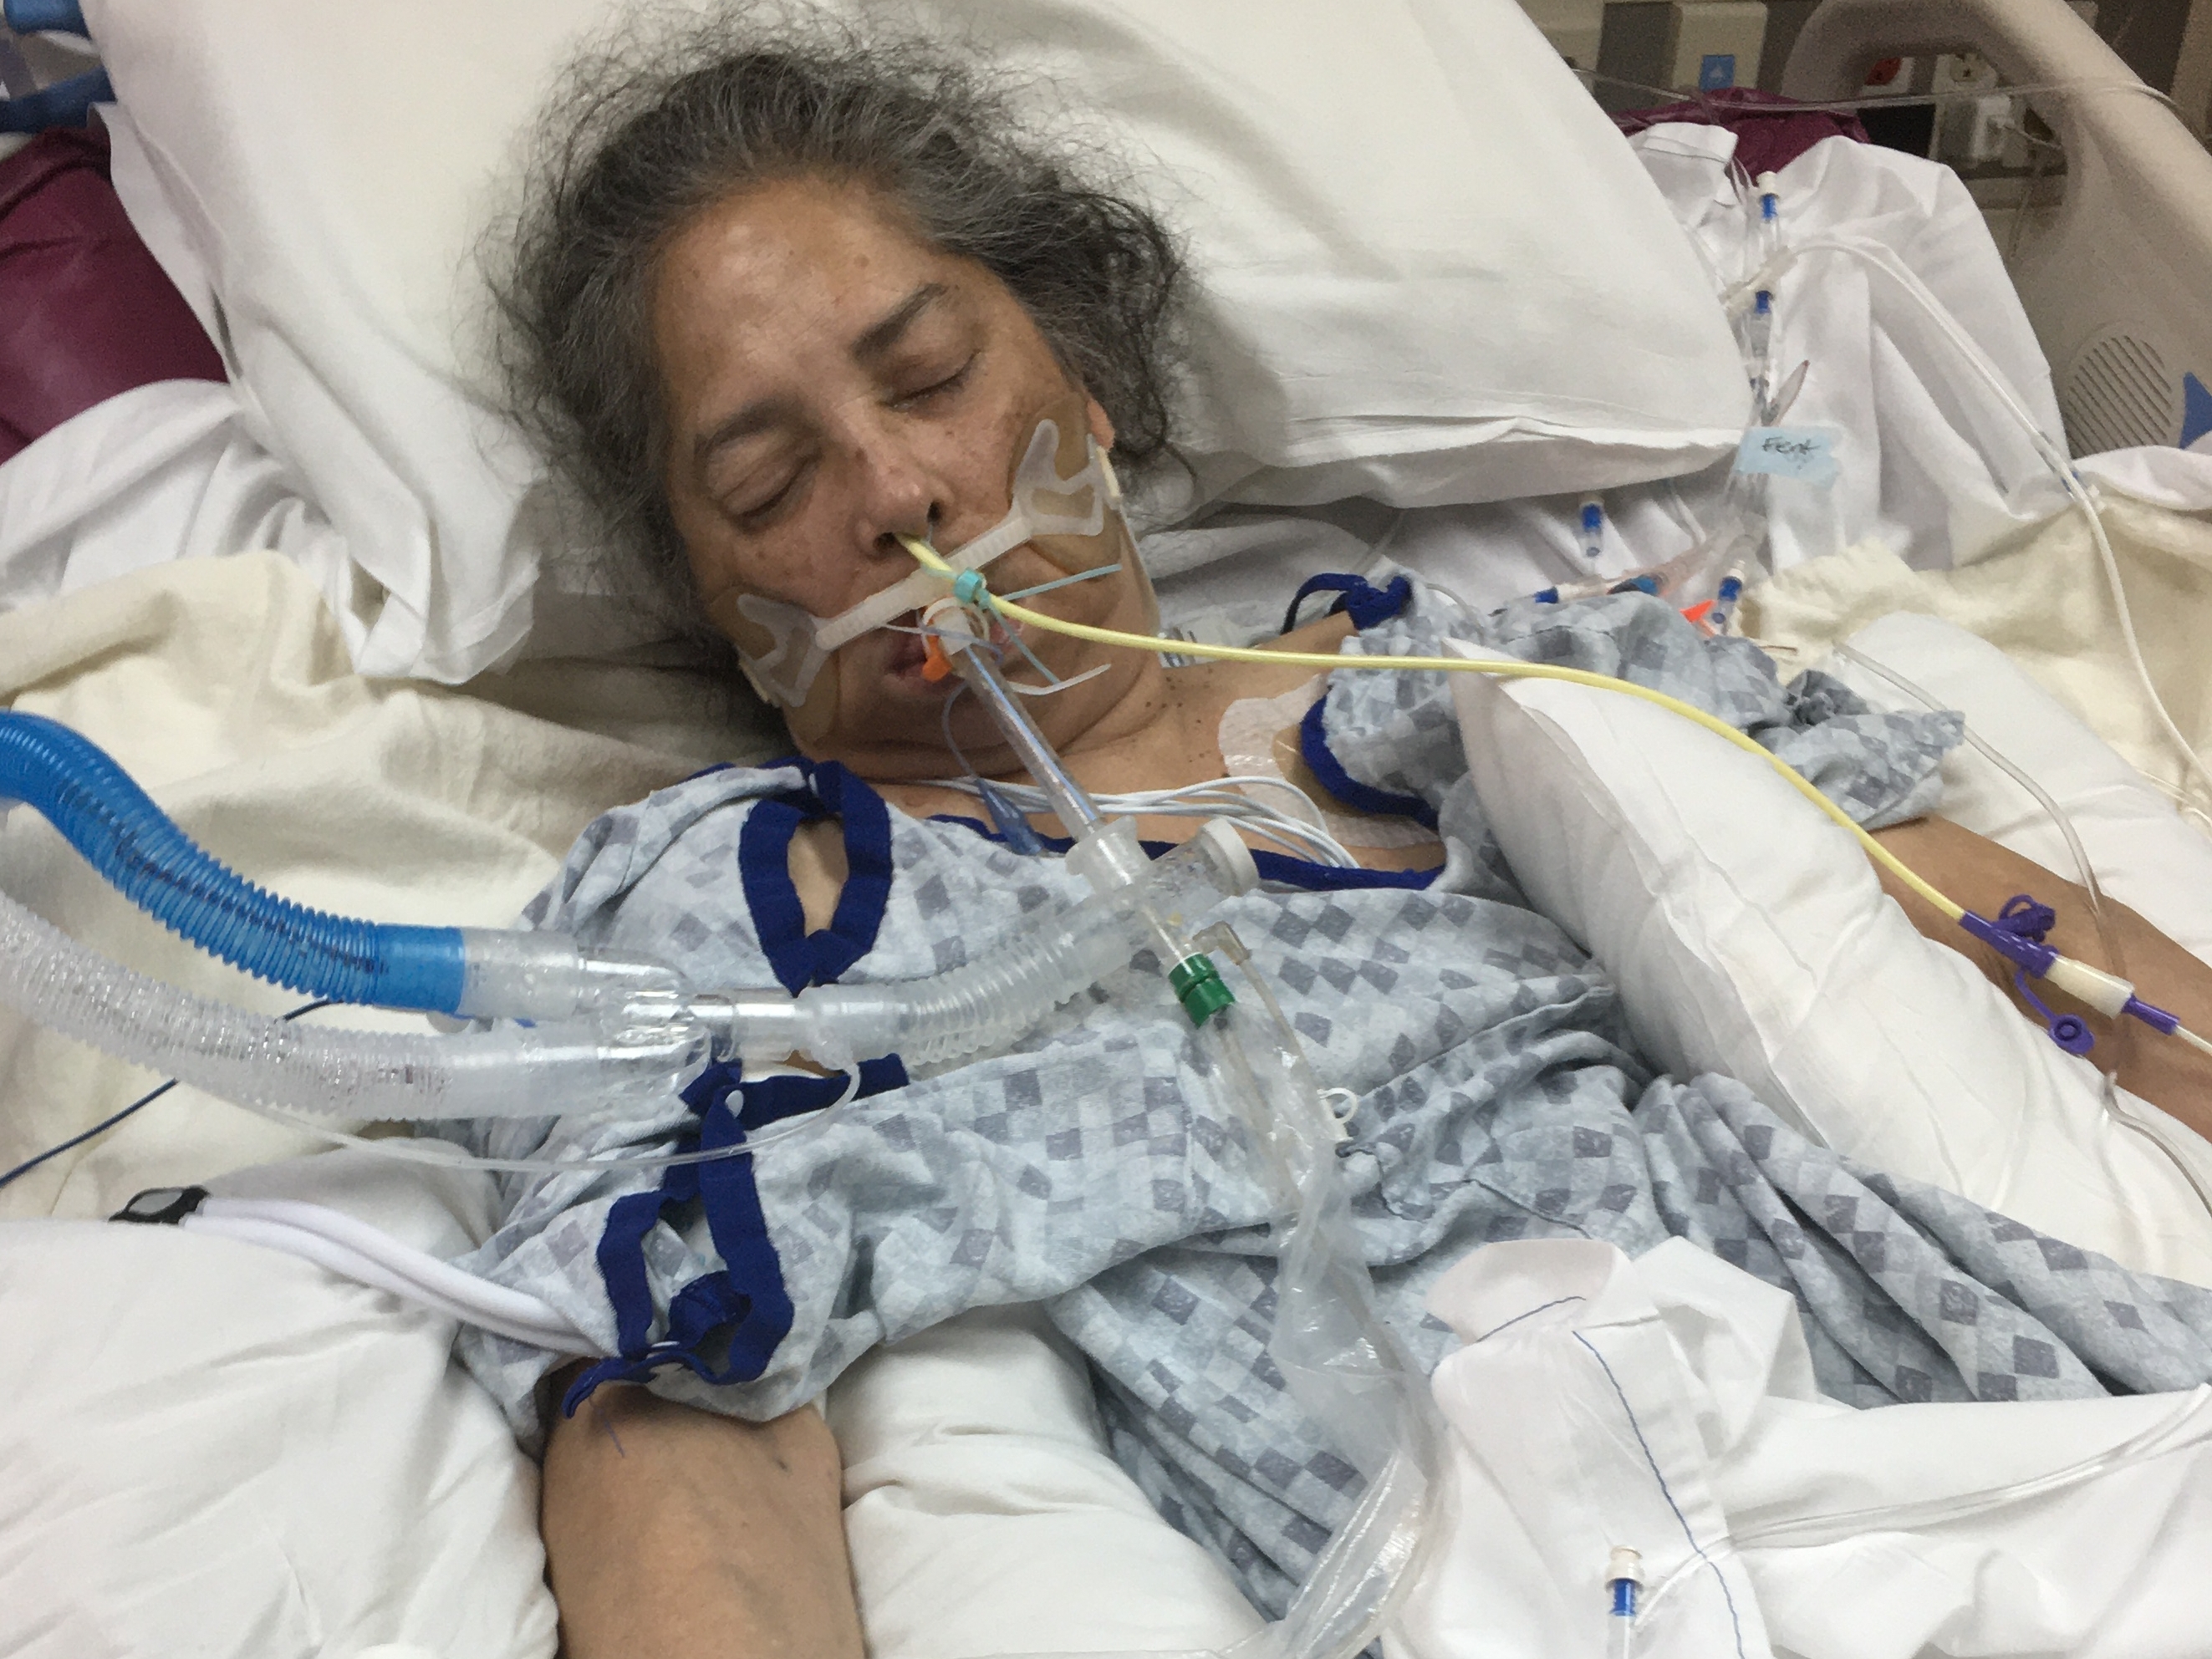 After his wife was put on a ventilator, a husband faced an agonizing  decision: Should he do whatever it took for her to wake up?